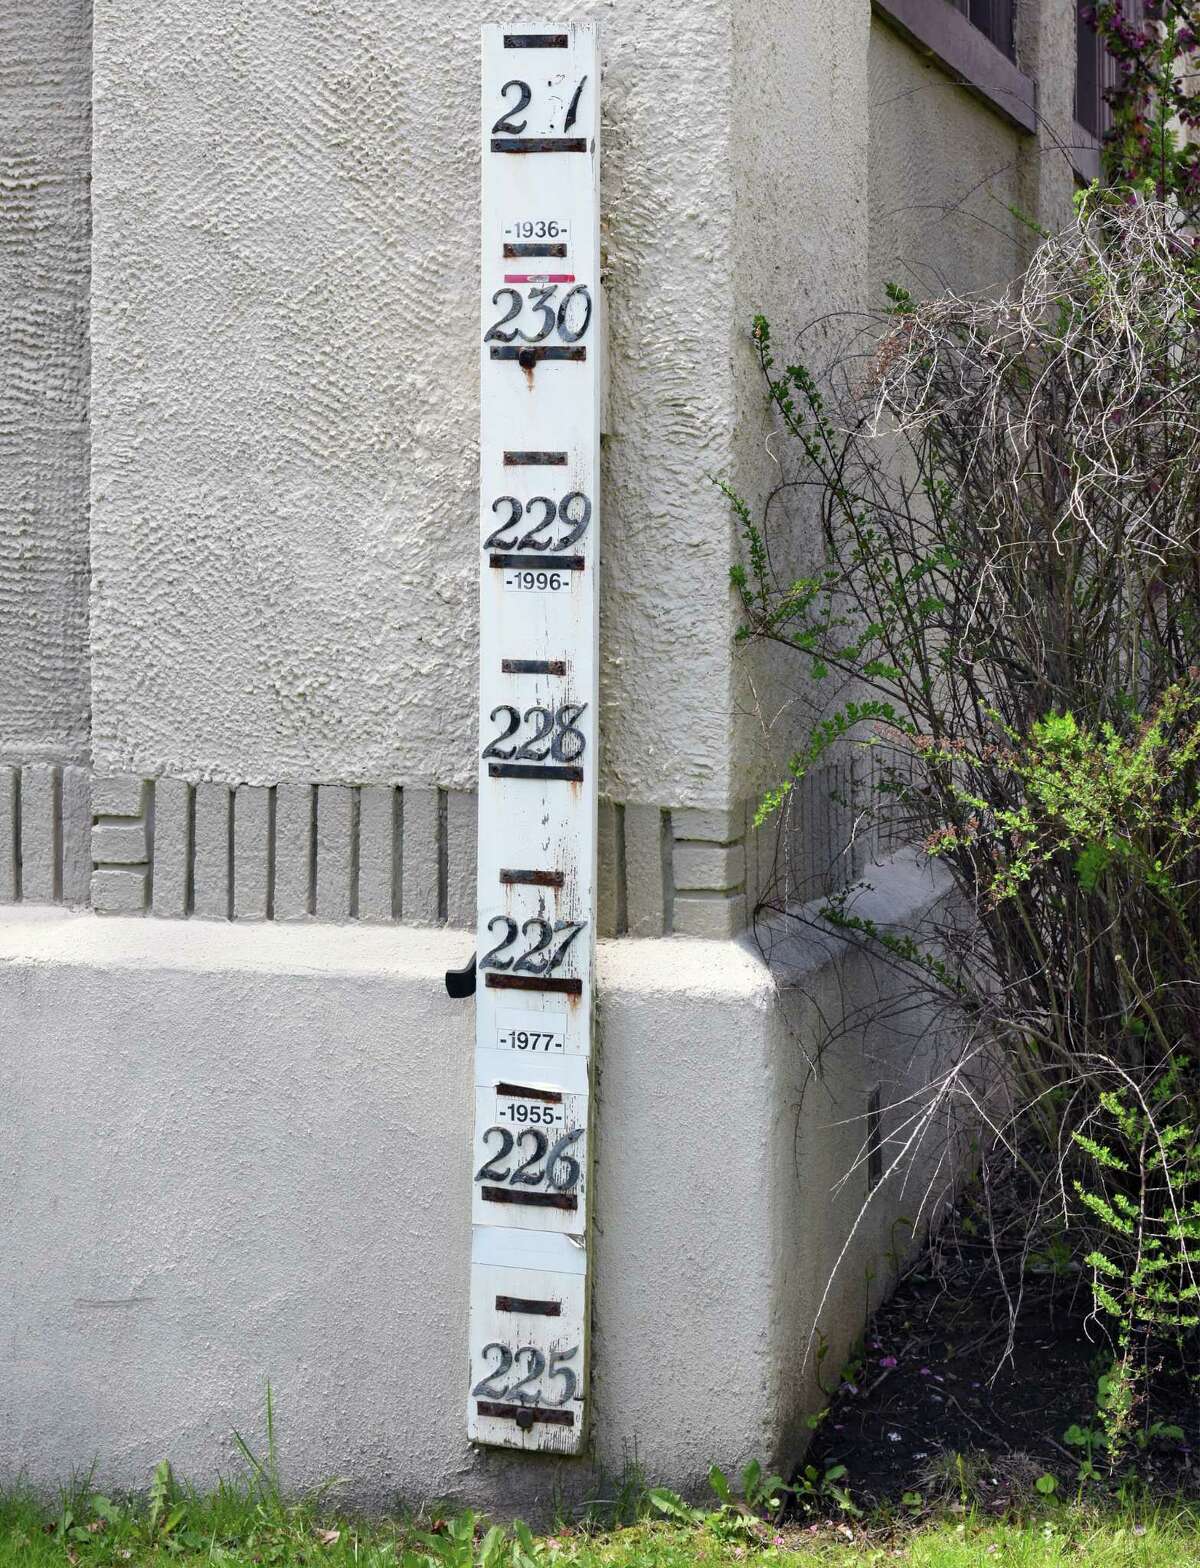 Water line marker outside the North Ferry Street pump station on the Mohawk River in the Stockade Wednesday May 3, 2017 in Schenectady, NY. Residents in the historic Stockade neighborhood fear a planned new pump station will obstruct views of the river. (John Carl D'Annibale / Times Union)